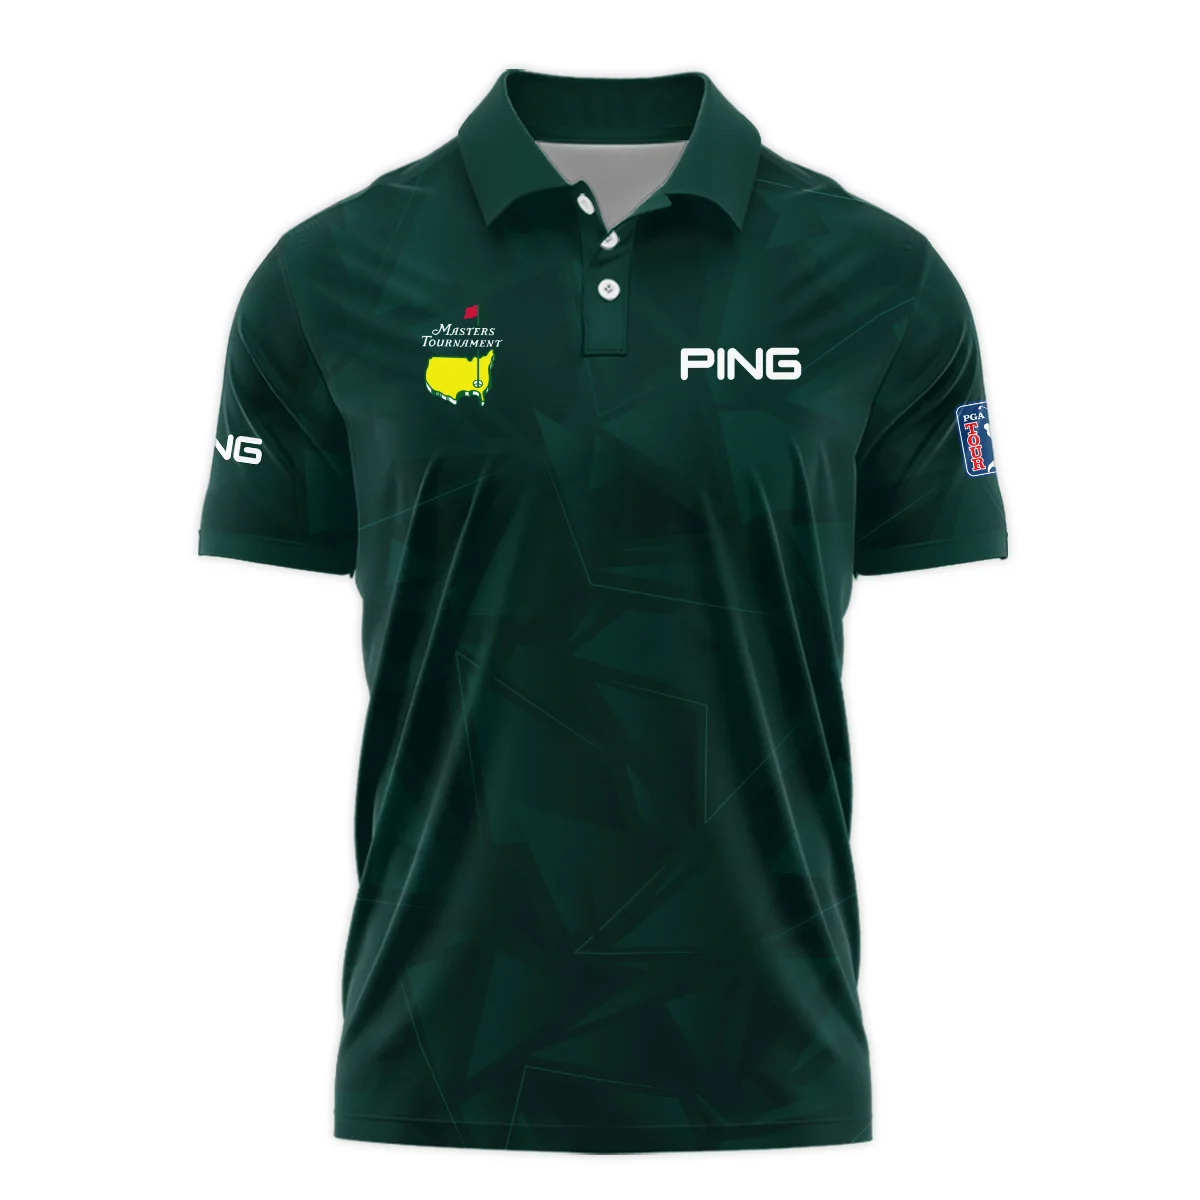 Dark Green Abstract Sport Masters Tournament Ping Polo Shirt Style Classic Polo Shirt For Men